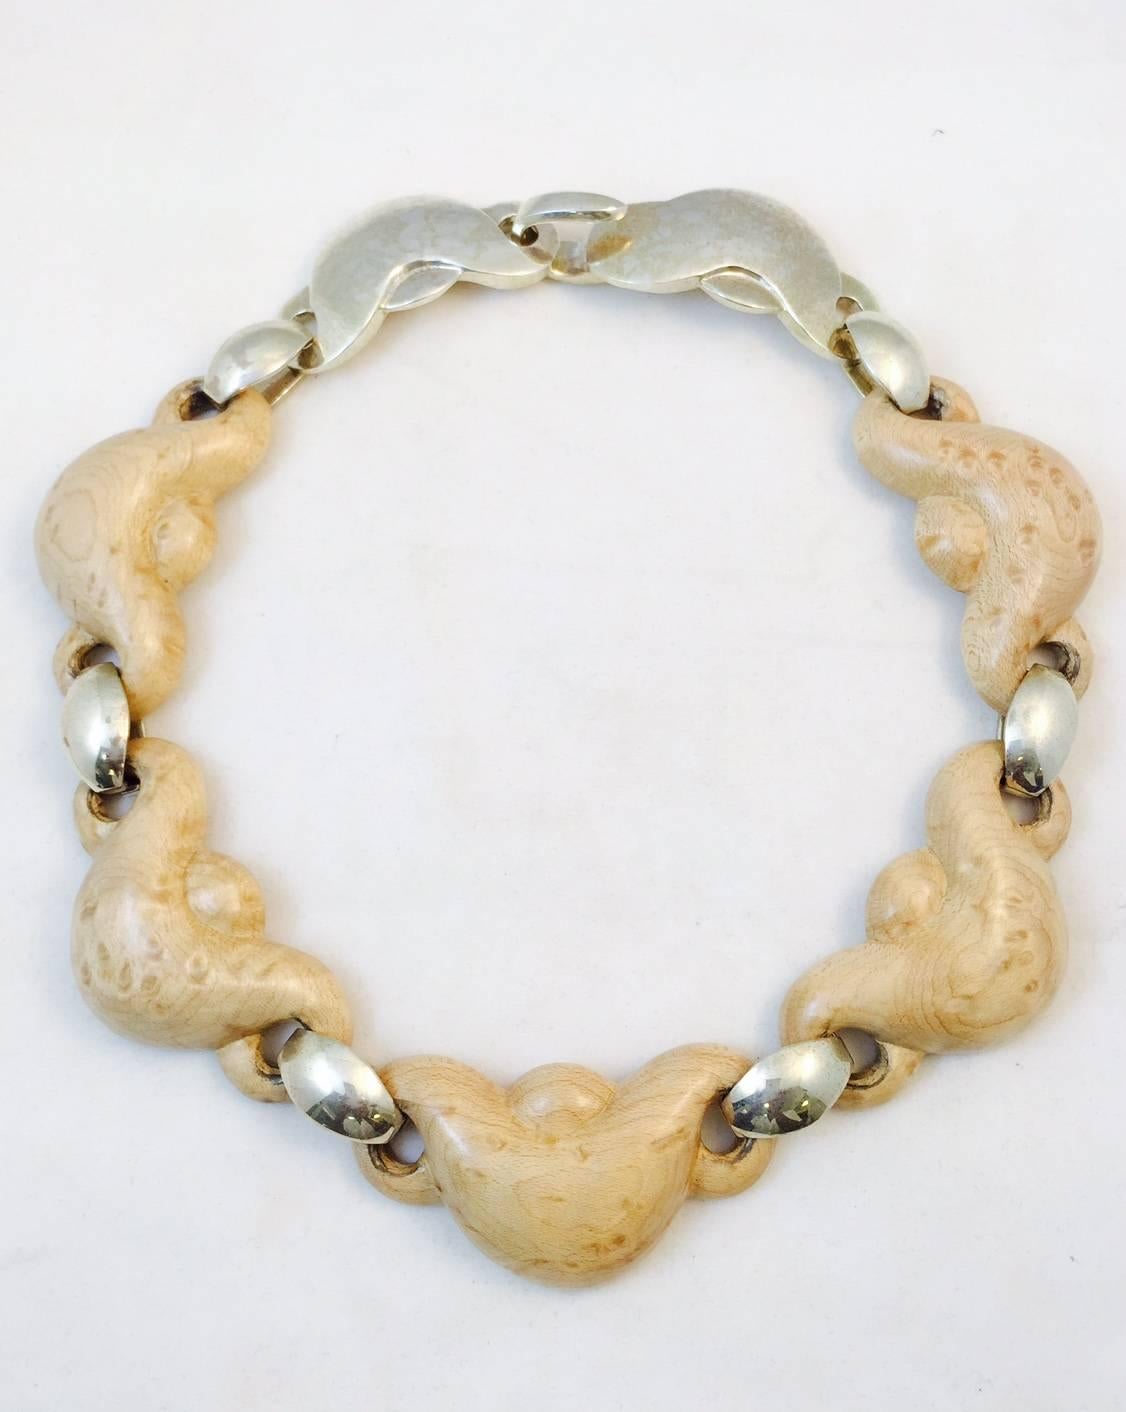 Patricia Von Musulin creates unique, one-of-a kind pieces.  Her artistry is unsurpassed.  Curvy, feminine stations of birds eye maple are so organic and sensual!  Matching the curves are connectors in sterling silver with a sterling silver clasp